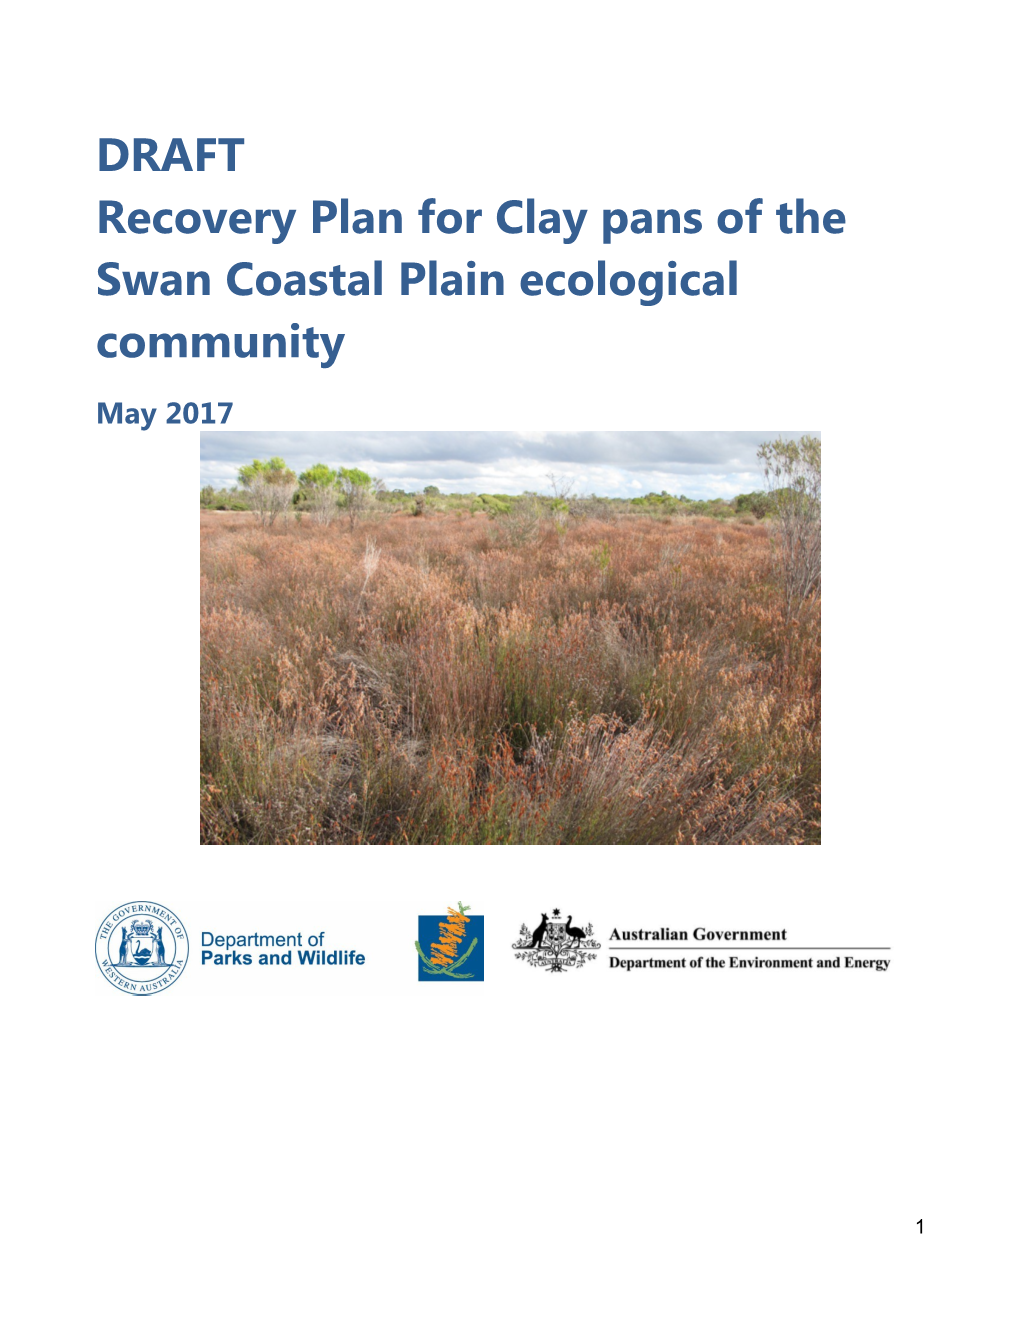 Draft Recovery Plan for Clay Pans of the Swan Coastal Plain Ecological Community